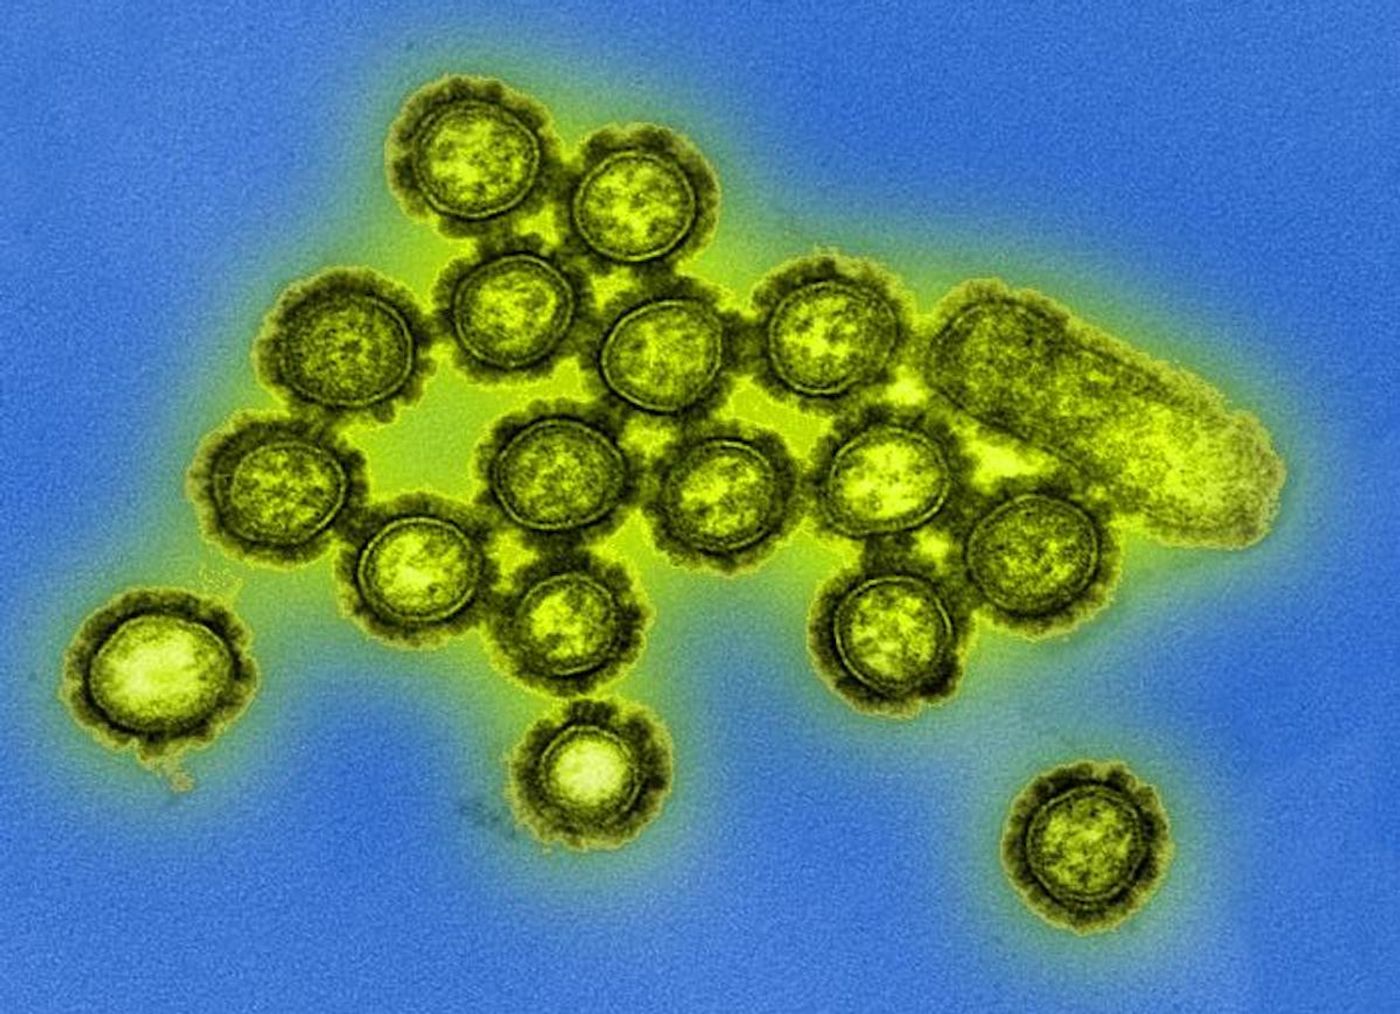 A digitally colorized TEM image depicting H1N1 influenza virus particles. Surface proteins located on the surface of the virus particles are shown in black. / Credit: National Institute of Allergy and Infectious Diseases (NIAID)